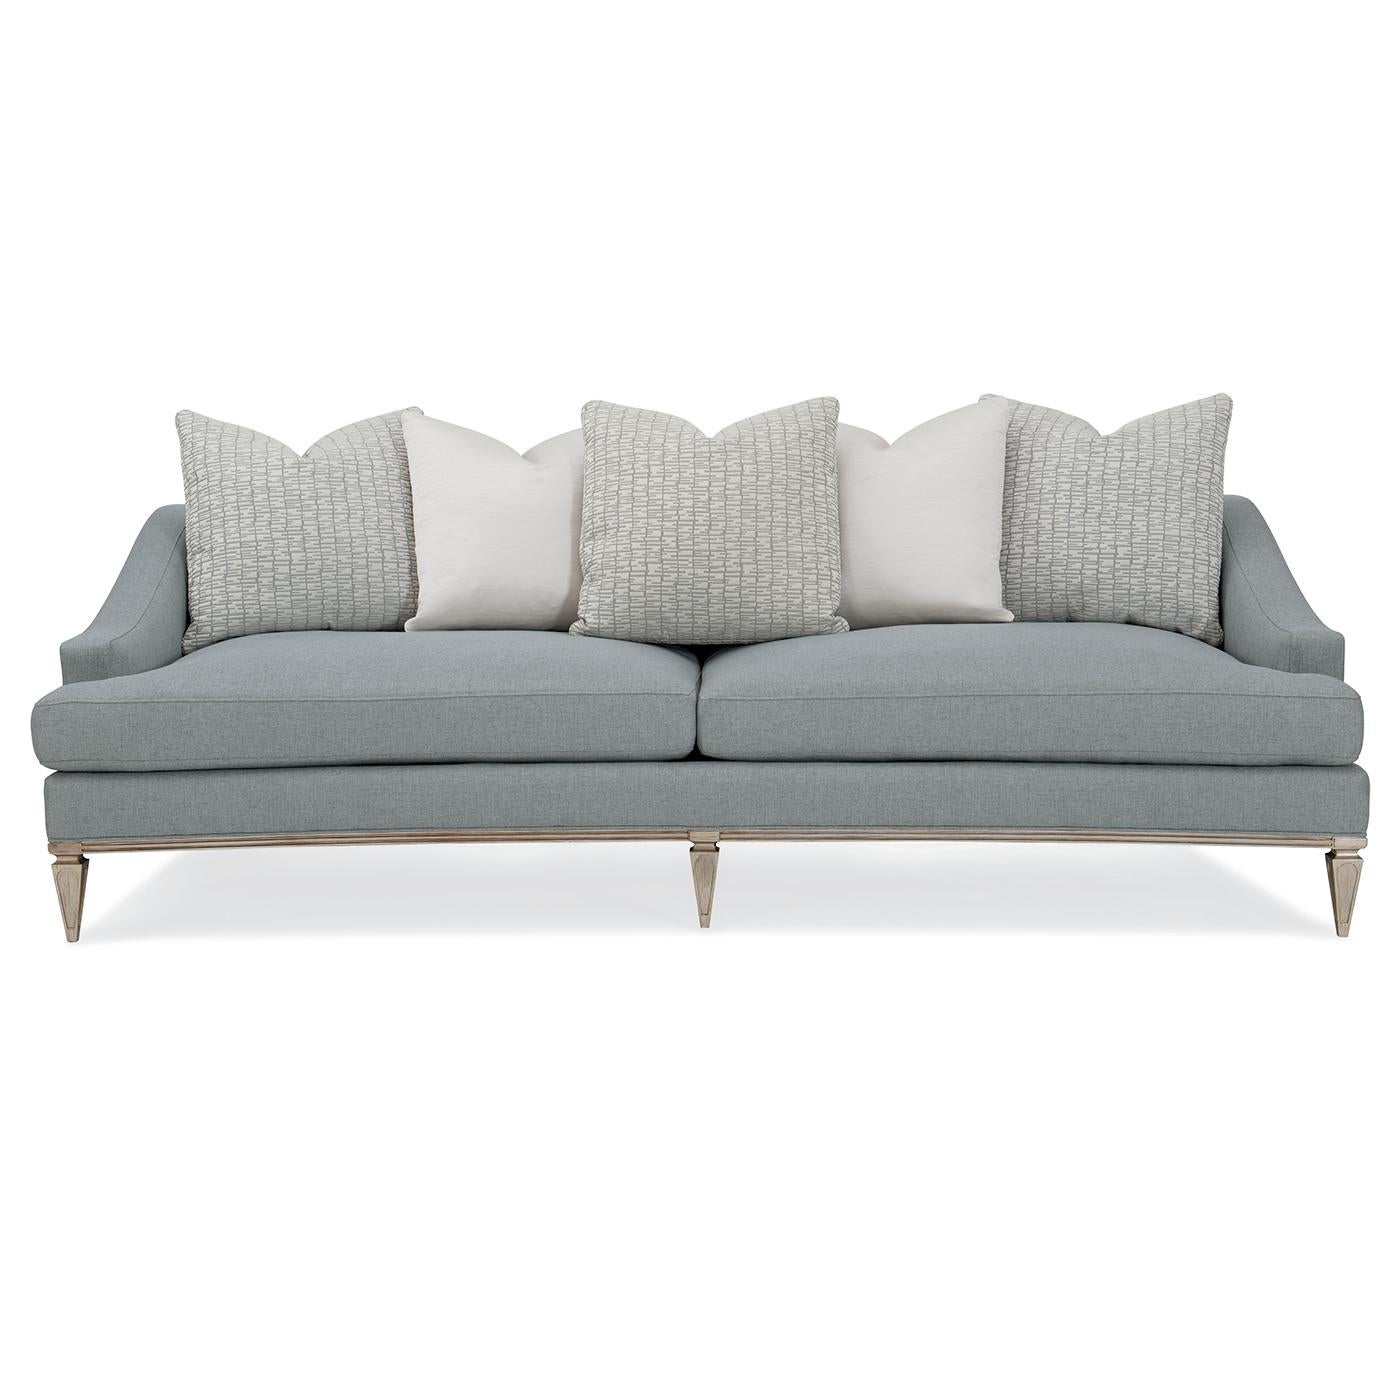 Updated Traditional Sofa that is stylishly expressive with its low-key elegance. A low back and sloping arms cradle the loose back pillow and create an updated traditional aesthetic that's tailored to perfection. It features two seat cushions and is